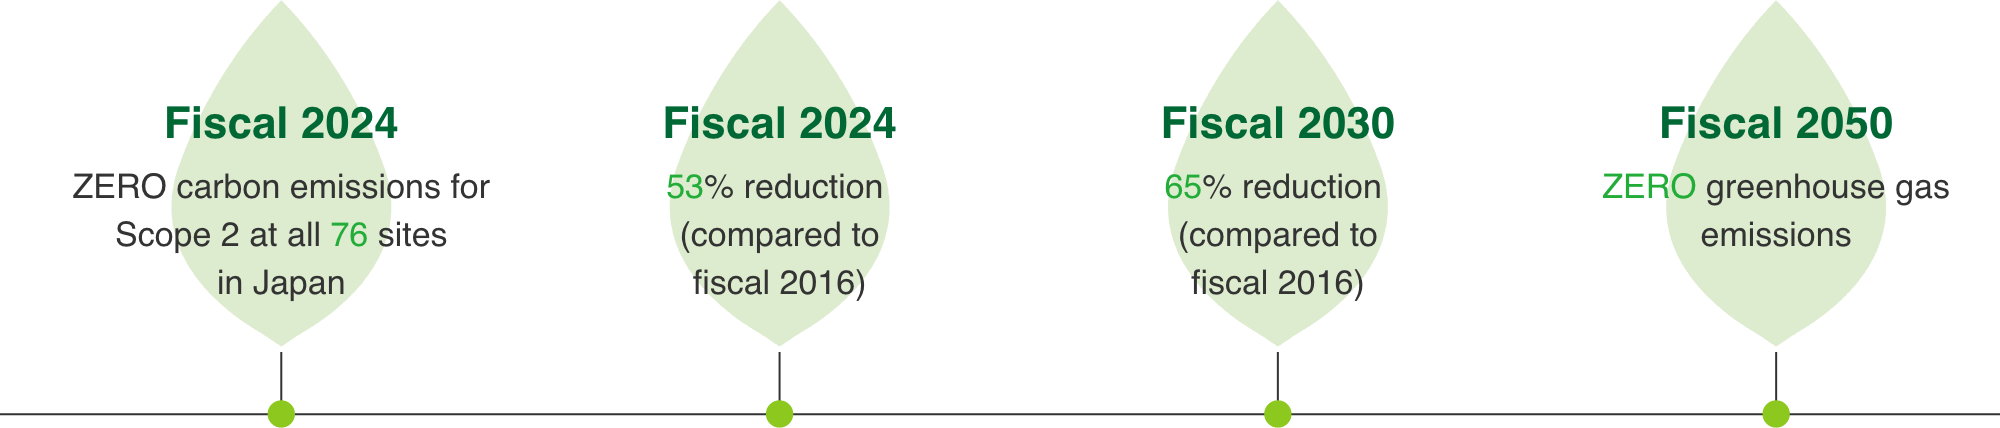  Fiscal 2024 ZERO carbon emissions for Scope 2 at all 76 sites in Japan / Fiscal 2024 53% reduction (compared to fiscal 2016) / Fiscal 2030 65% reduction (compared to fiscal 2016) / Fiscal 2050 ZERO greenhouse gas emissions 